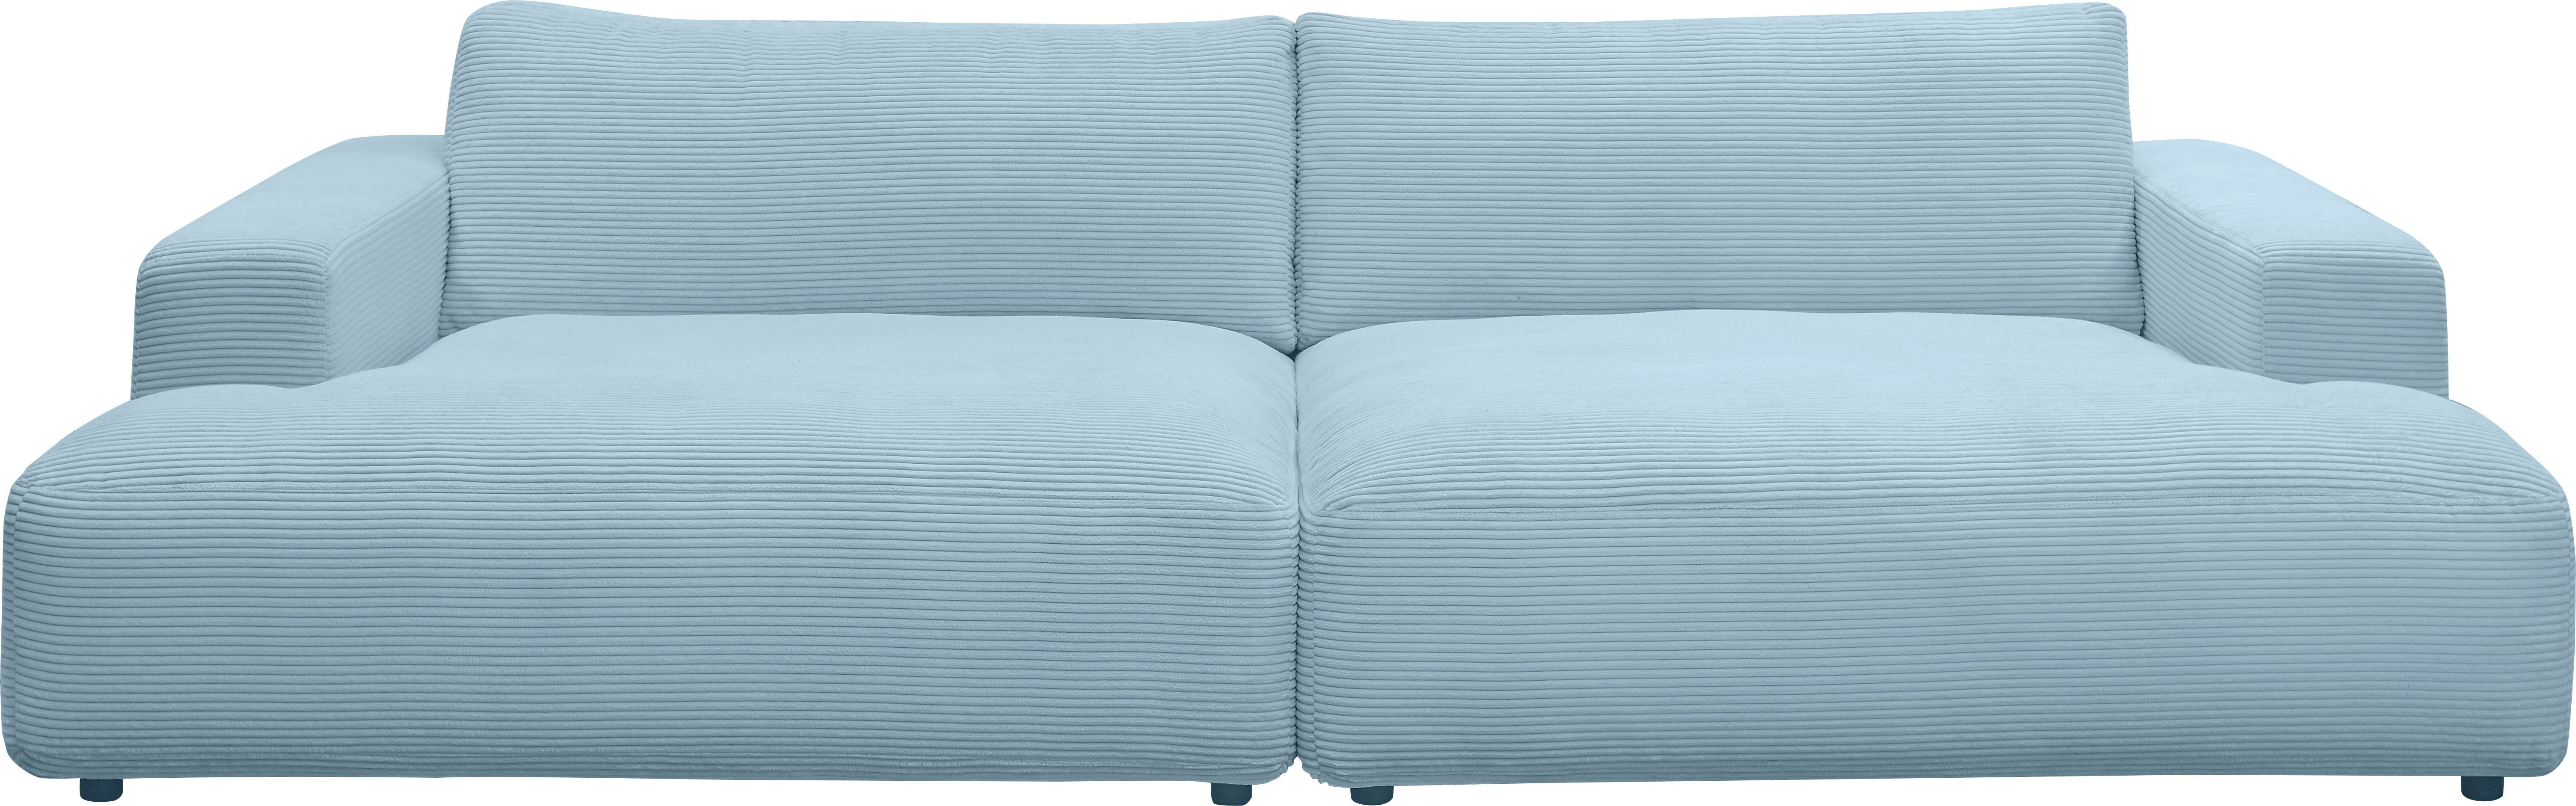 GALLERY M branded by Musterring Loungesofa Lucia, Cord-Bezug, Breite 292 cm light-blue | Alle Sofas